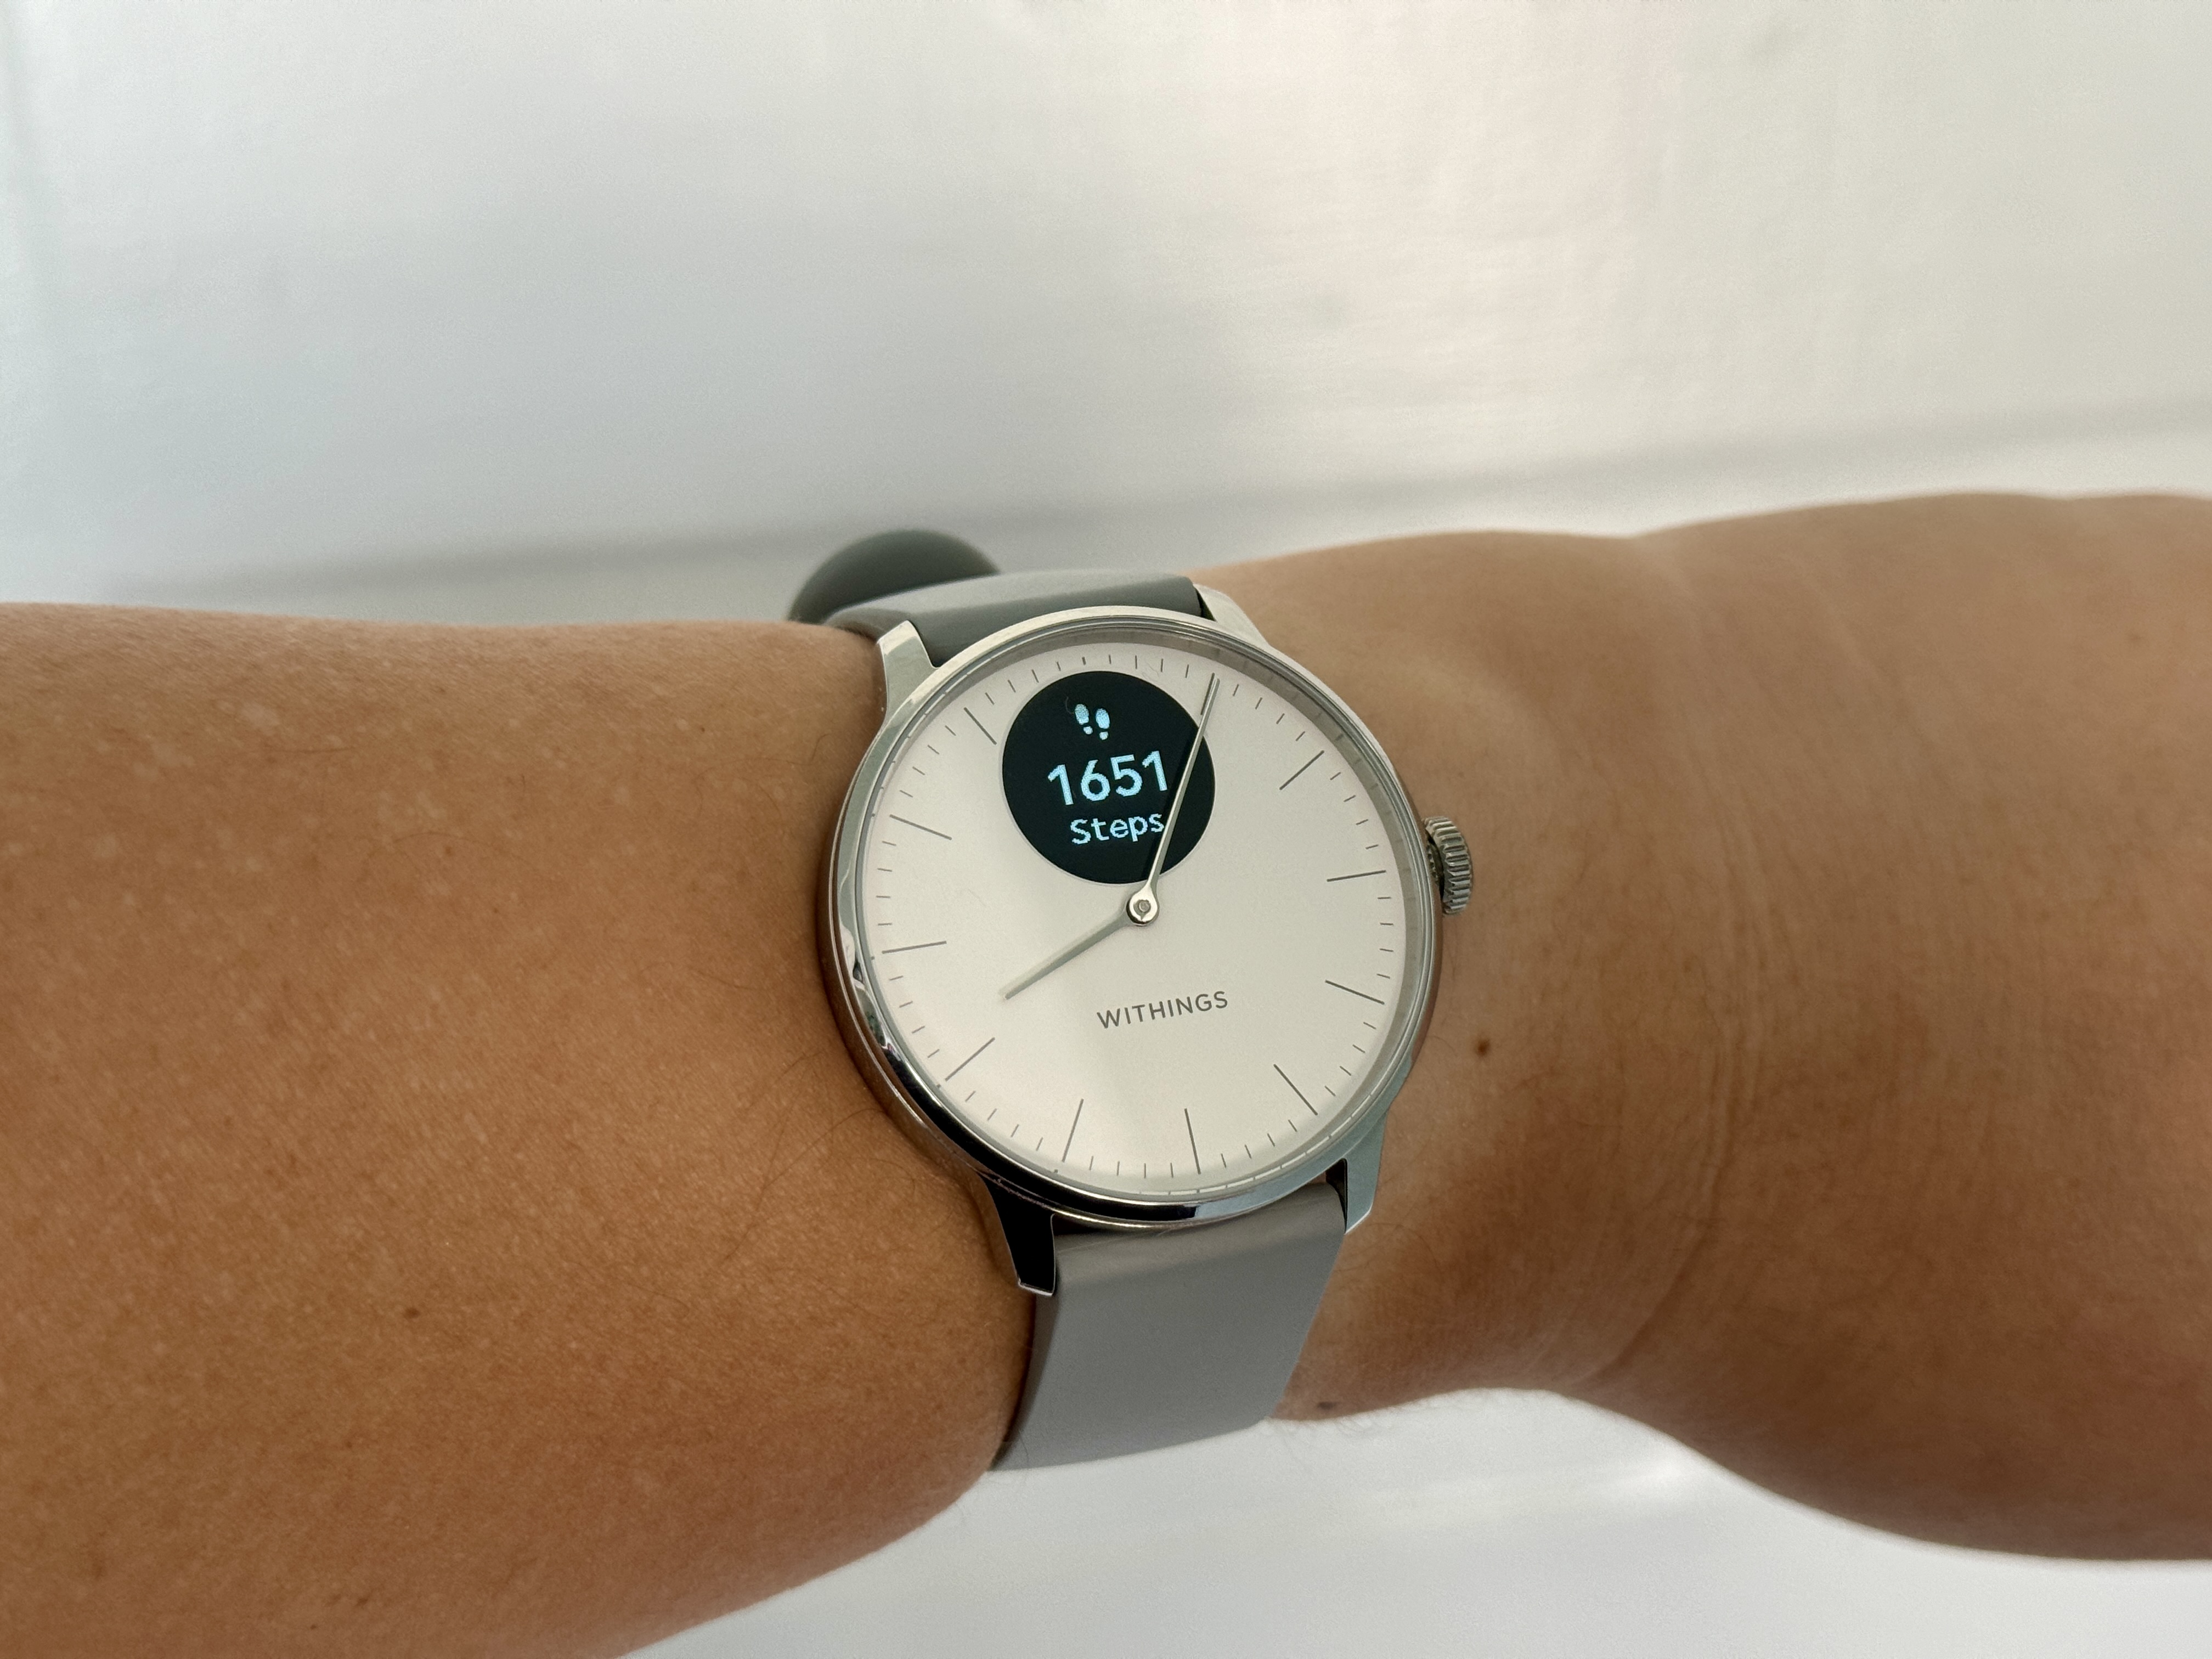 Withings ScanWatch Light watch face showing steps.